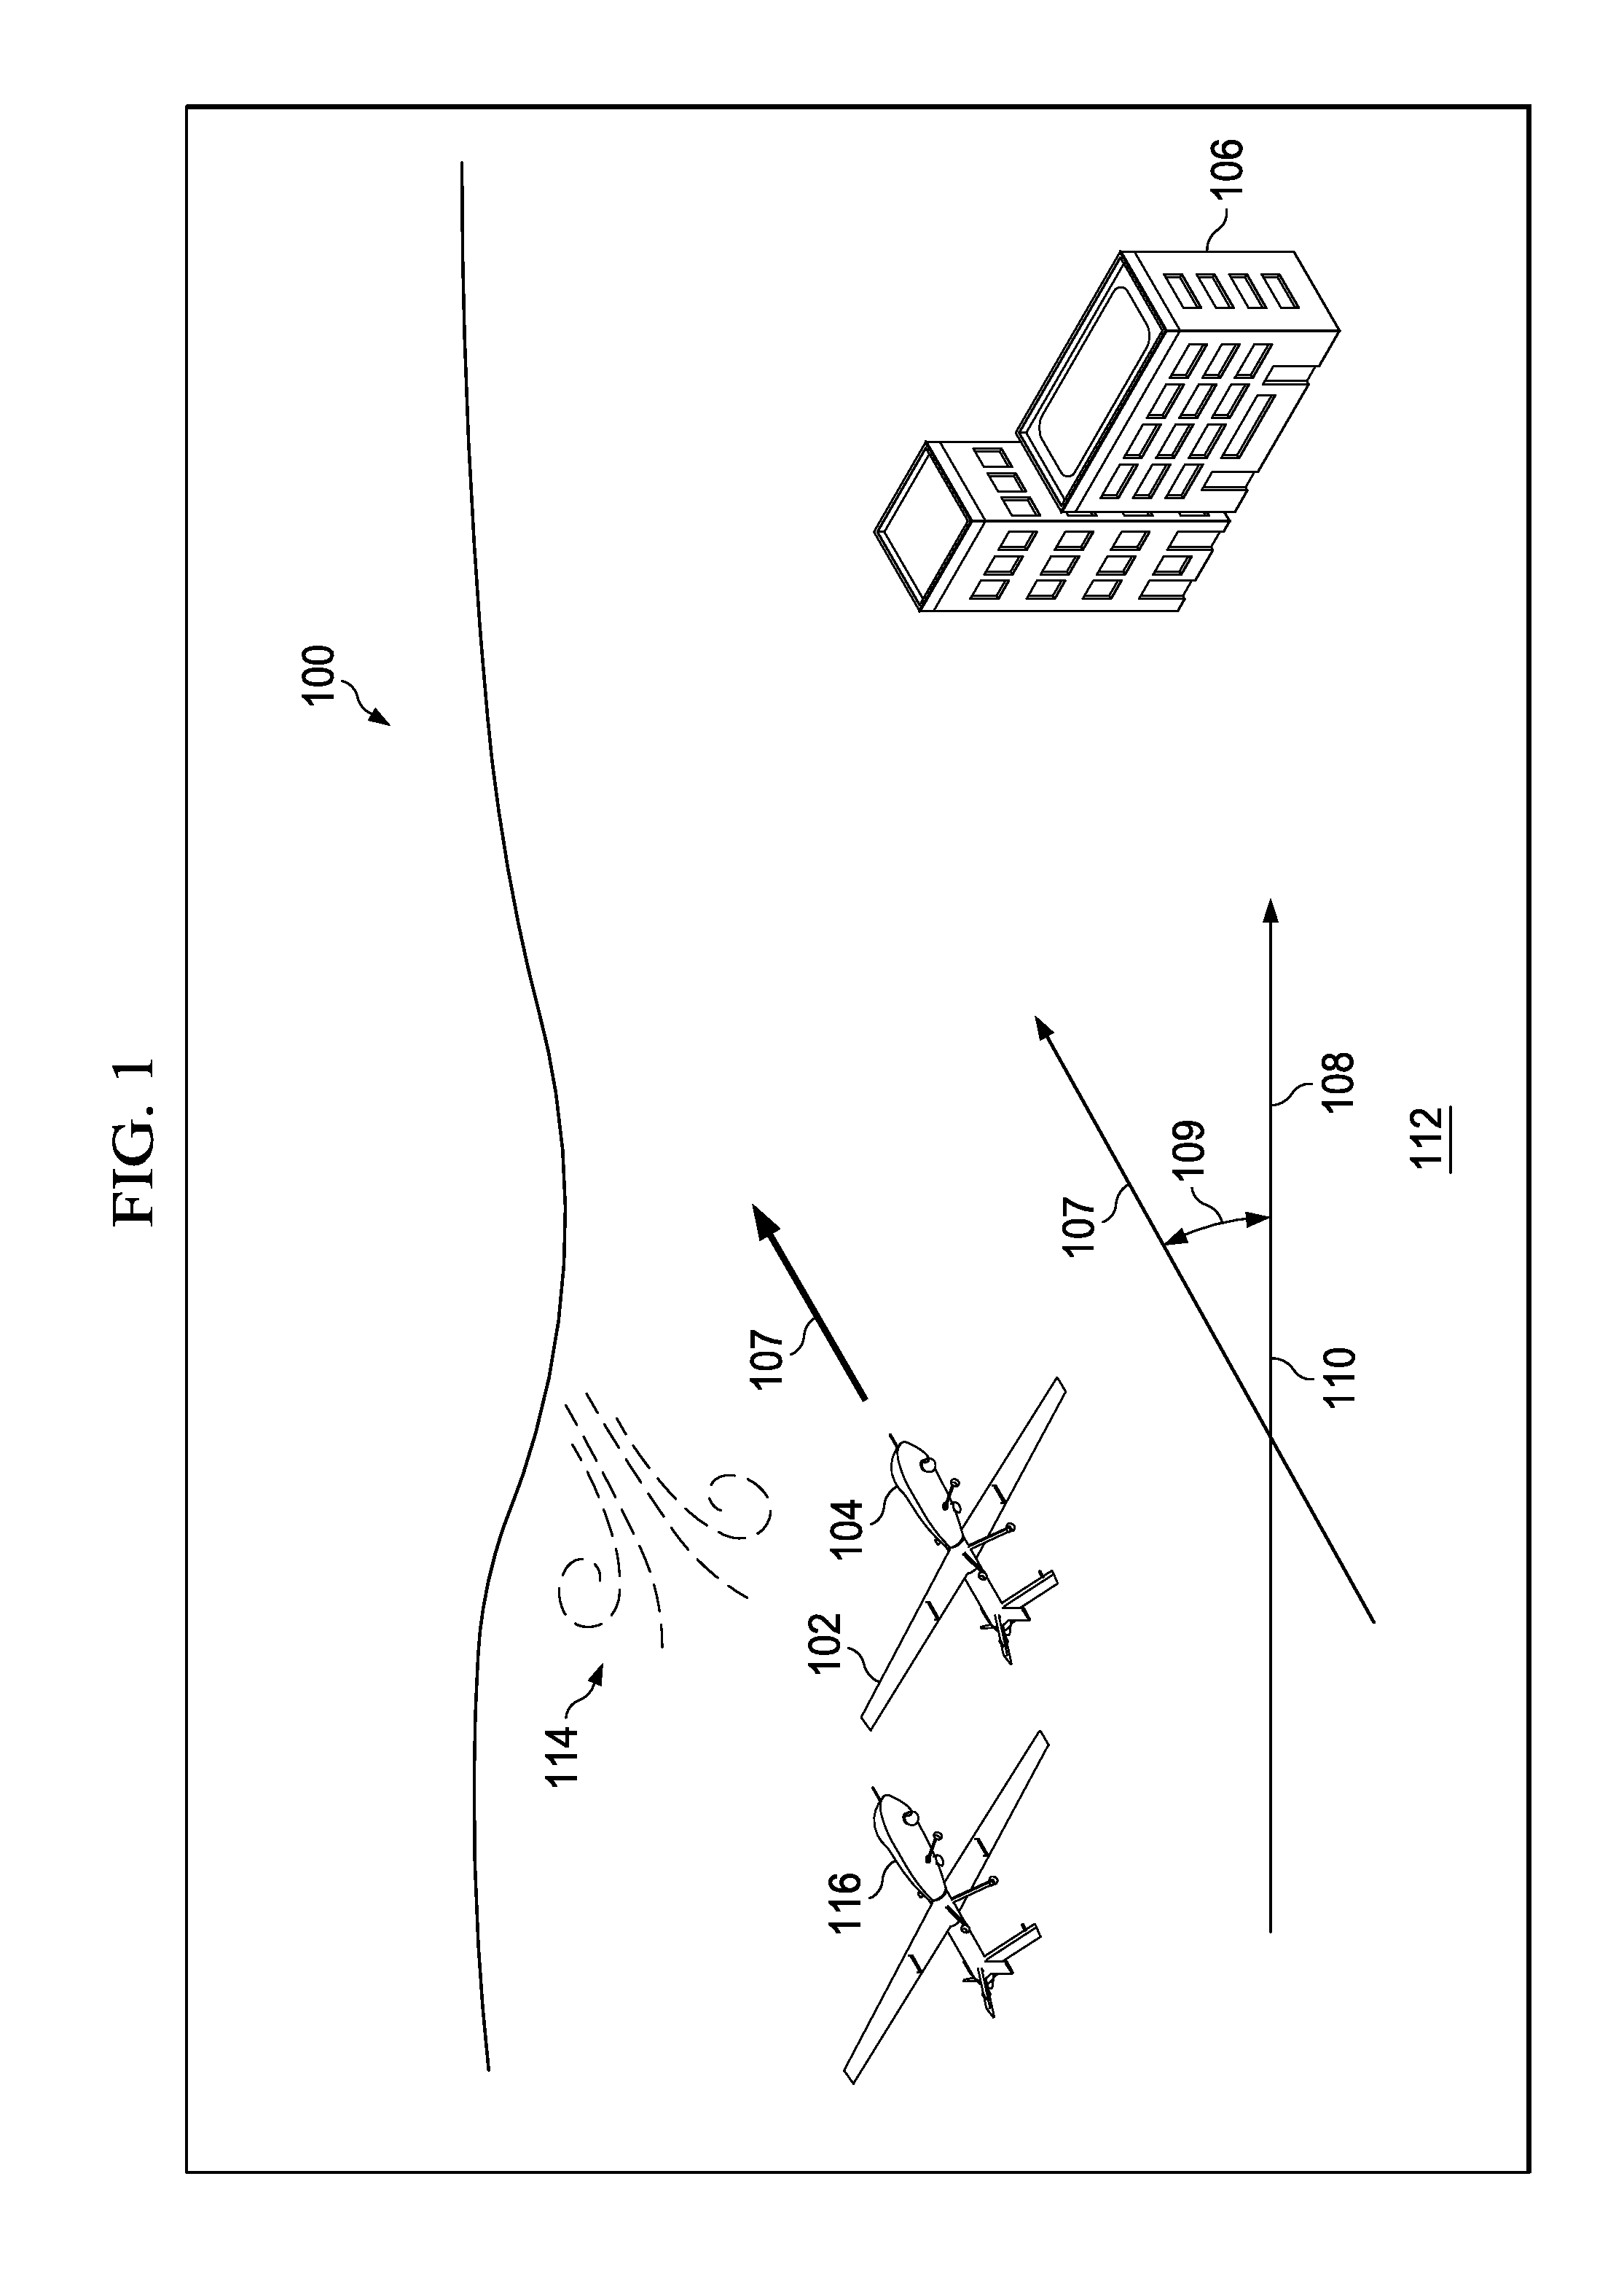 Wind Calculation System Using a Constant Bank Angle Turn